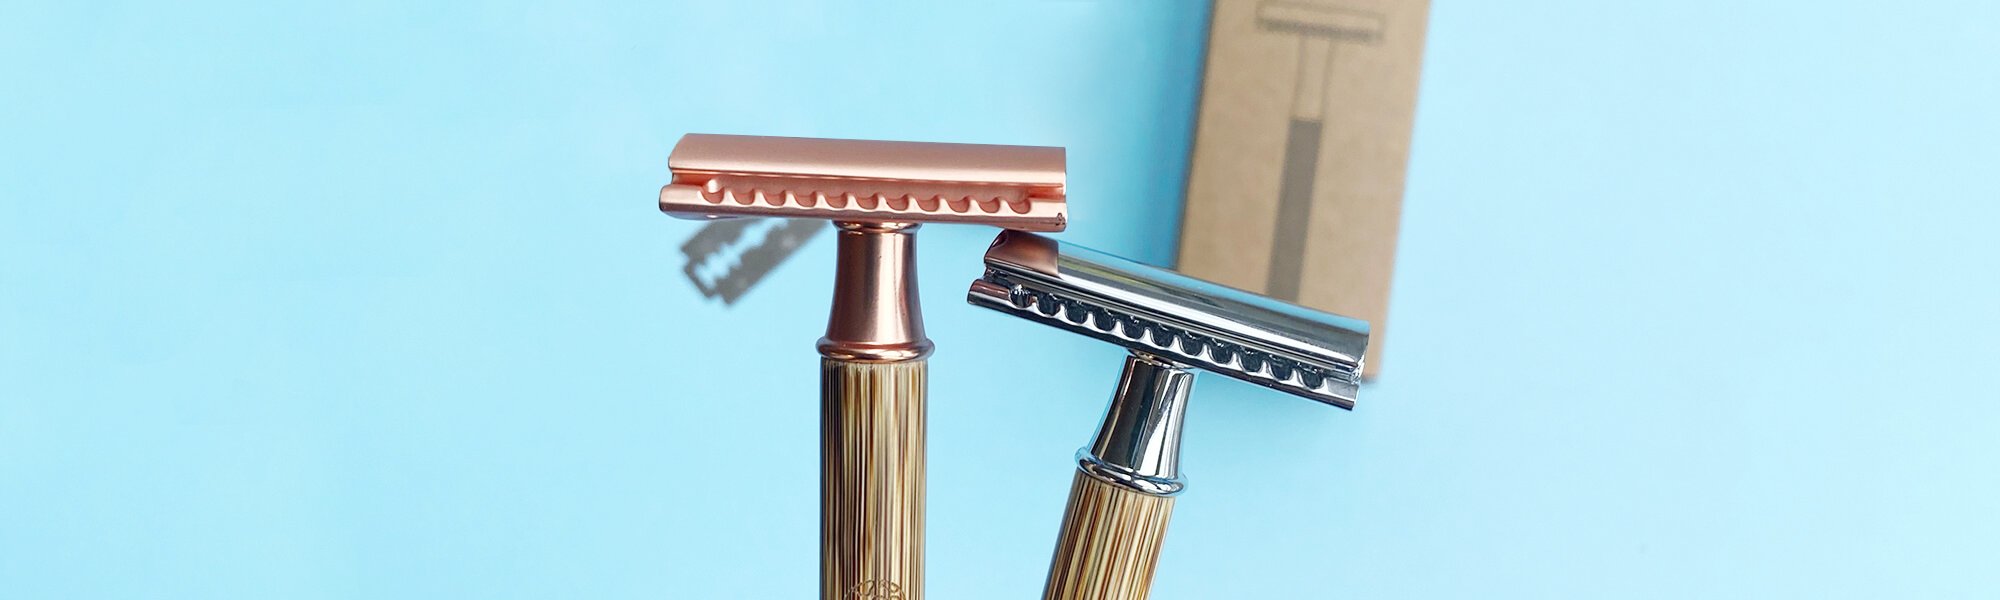 How and Why Use Safety Razor Blades? A quick guide